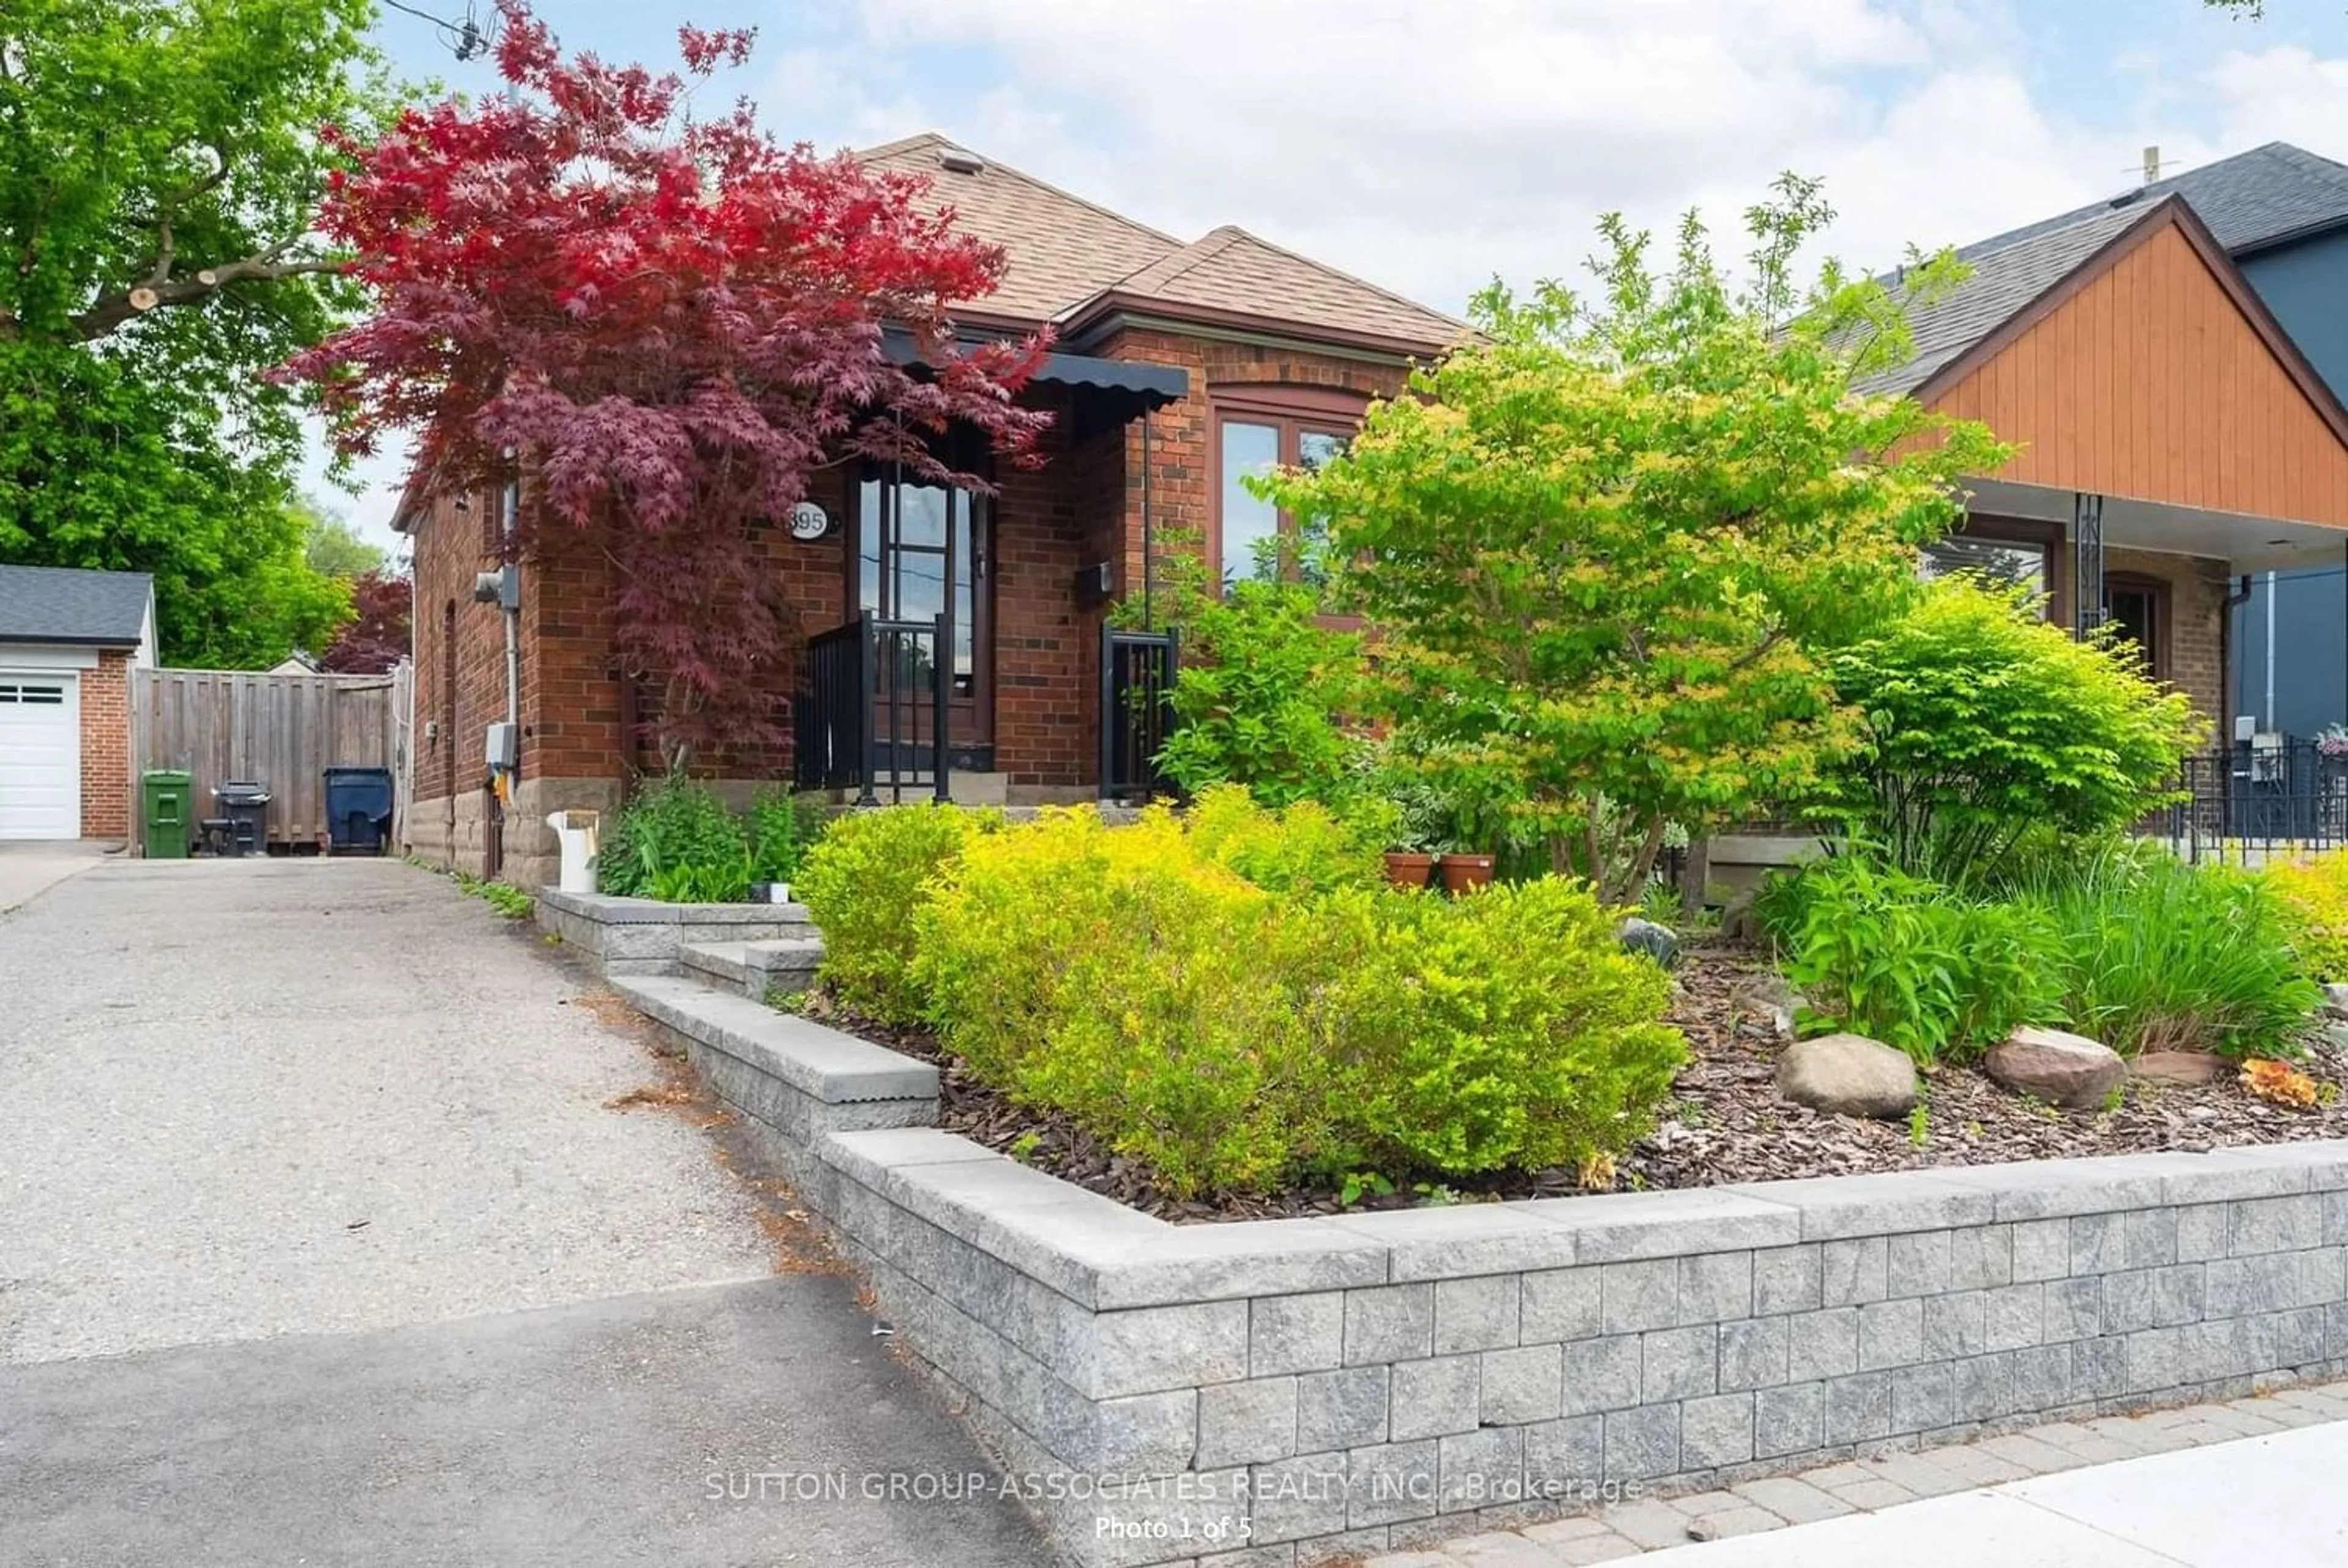 Home with brick exterior material for 395 Winnett Ave, Toronto Ontario M6C 3M2